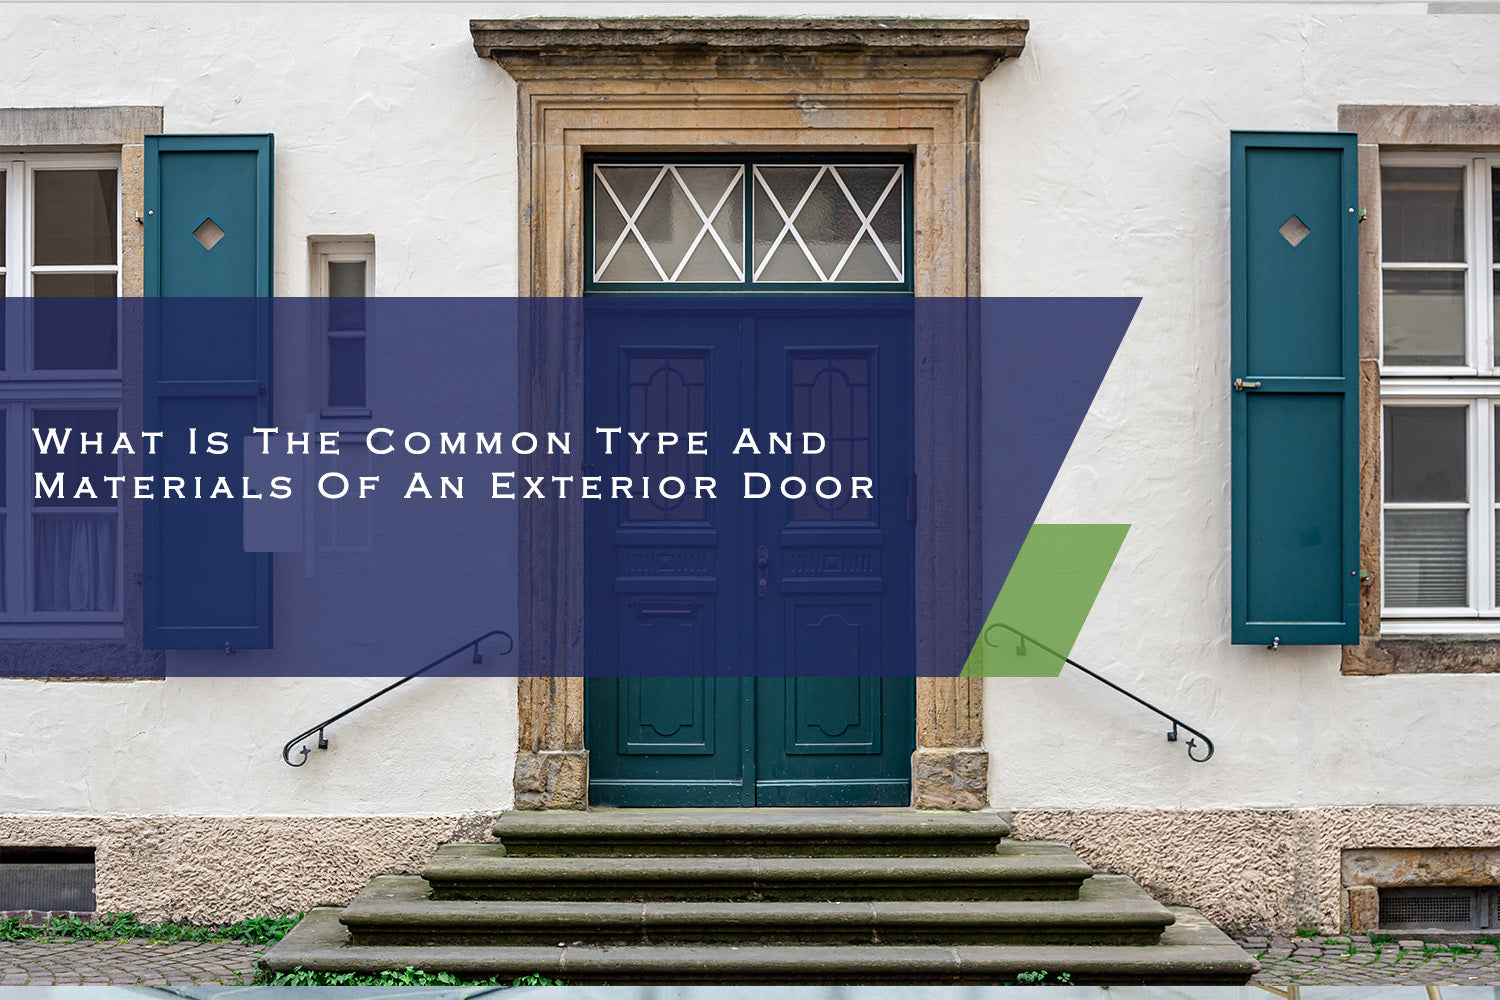 What Is The Common Type And Materials Of An Exterior Door?